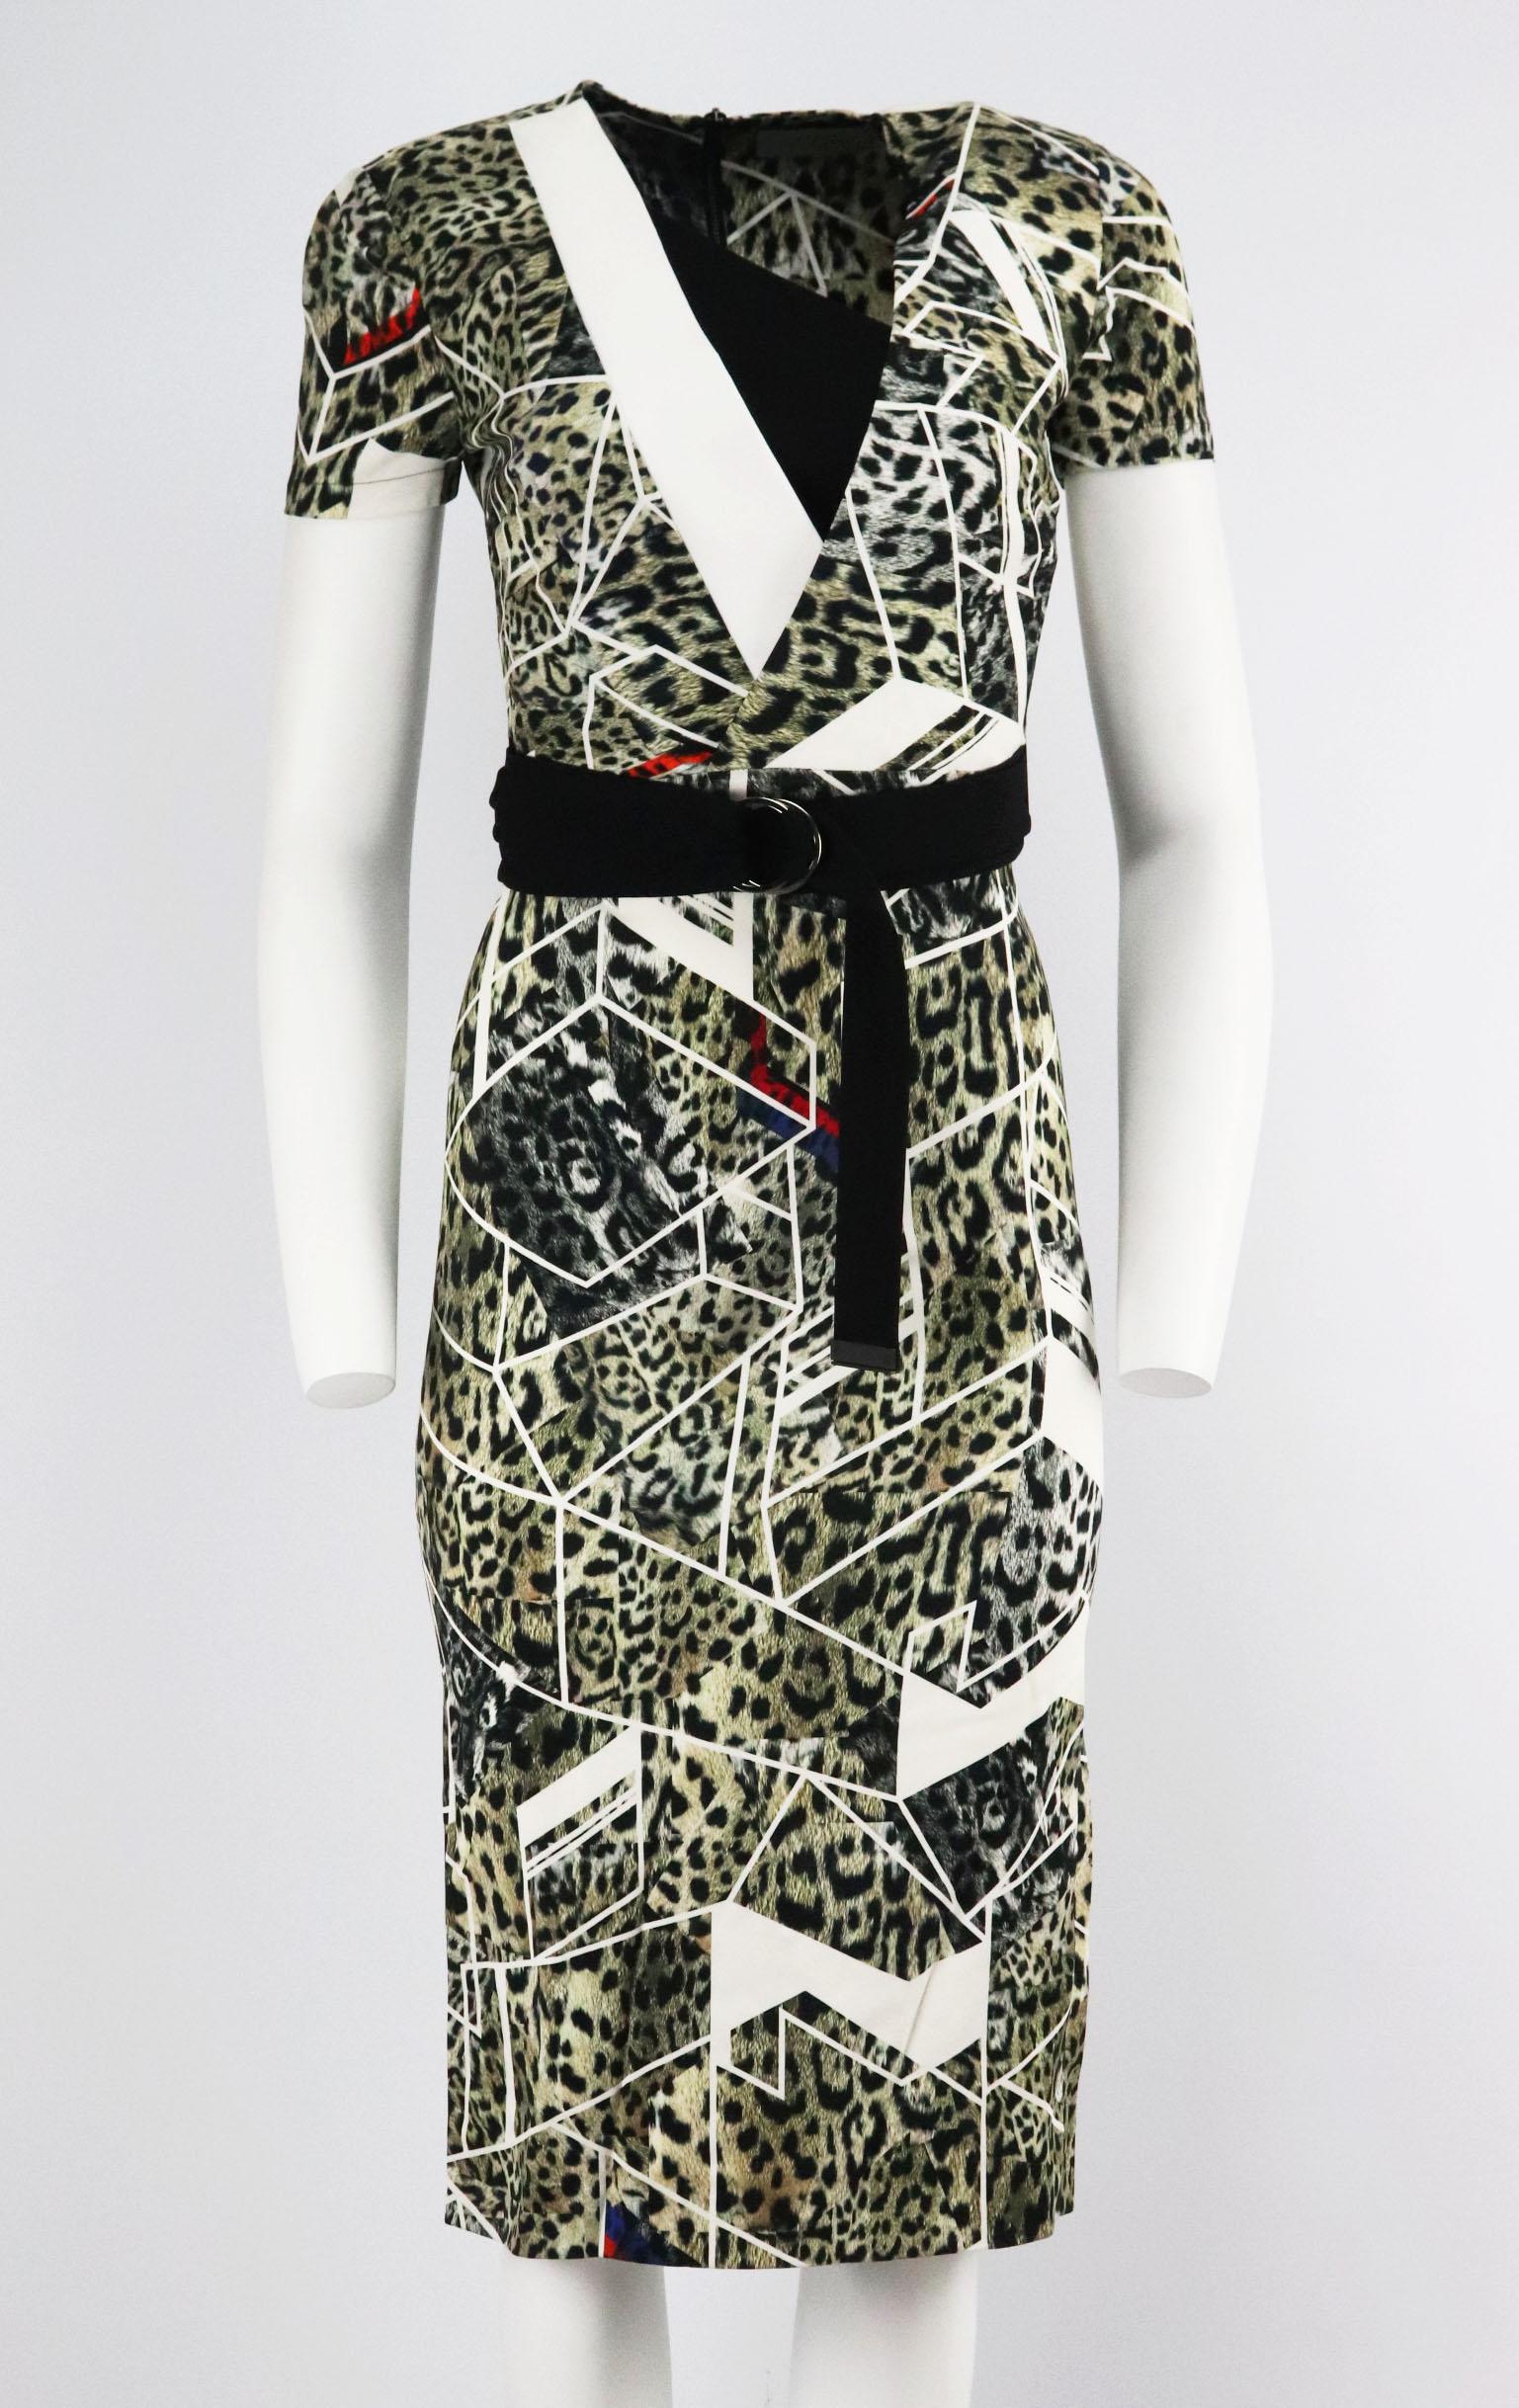 This dress by Preen by Thornton Bregazzi is made from jersey that's printed with a geometric and leopard design, it's cut in a wrap-effect silhouette, it's embellished with an D-shaped ring belt that emphasizes the waist and falls to hit just below